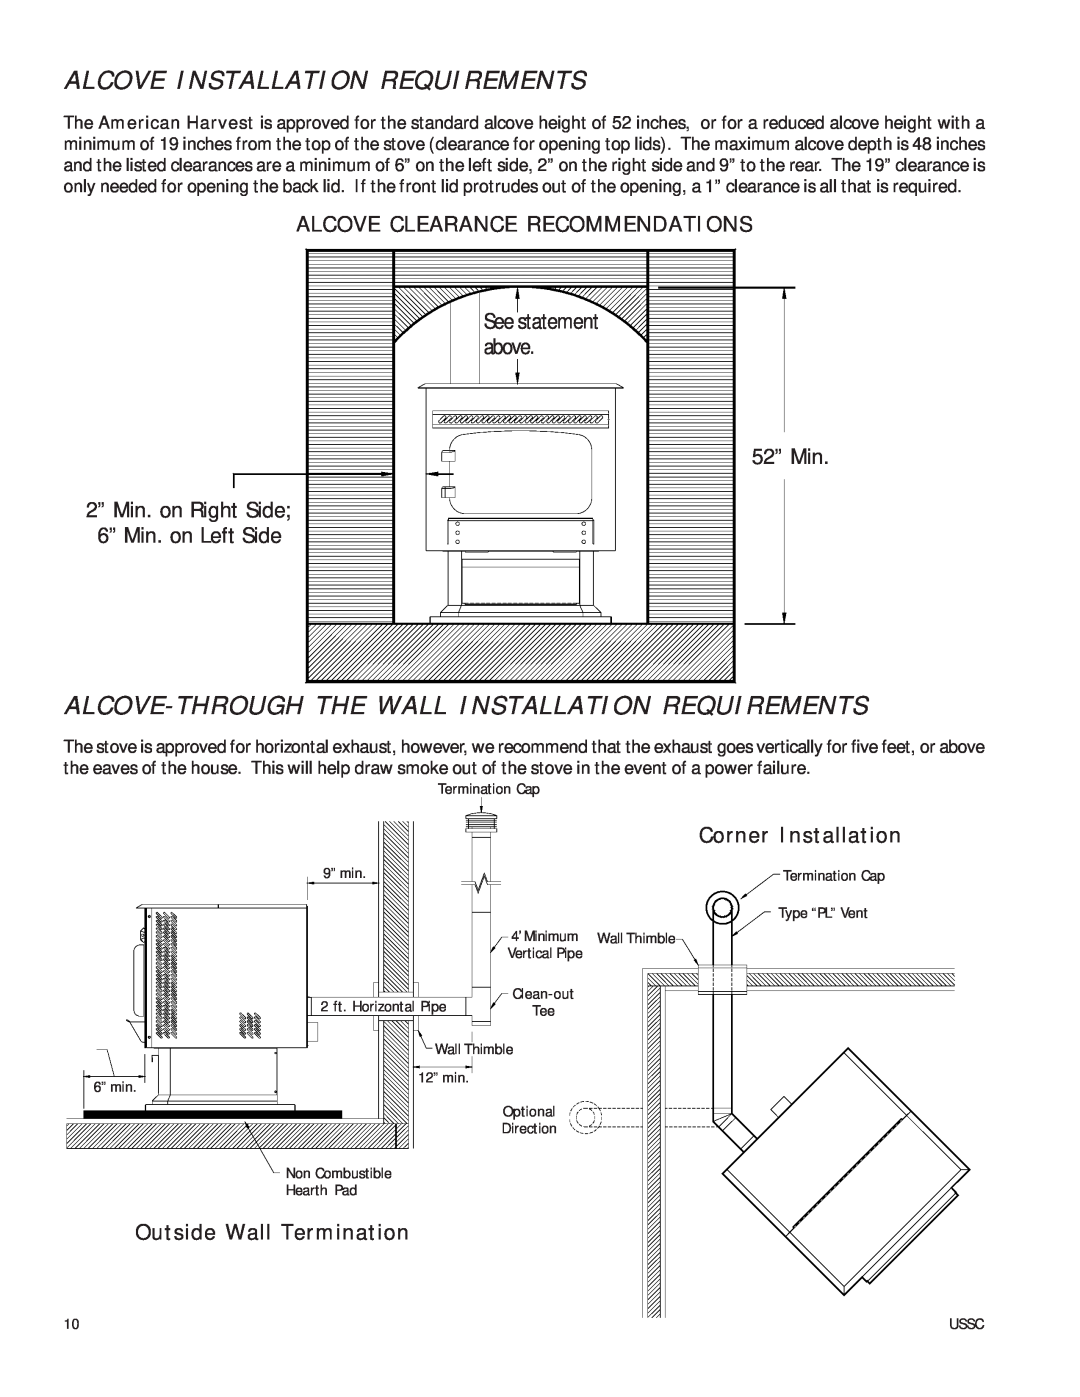 United States Stove 6035 owner manual Alcove Installation Requirements, Alcove-Throughthe Wall Installation Requirements 